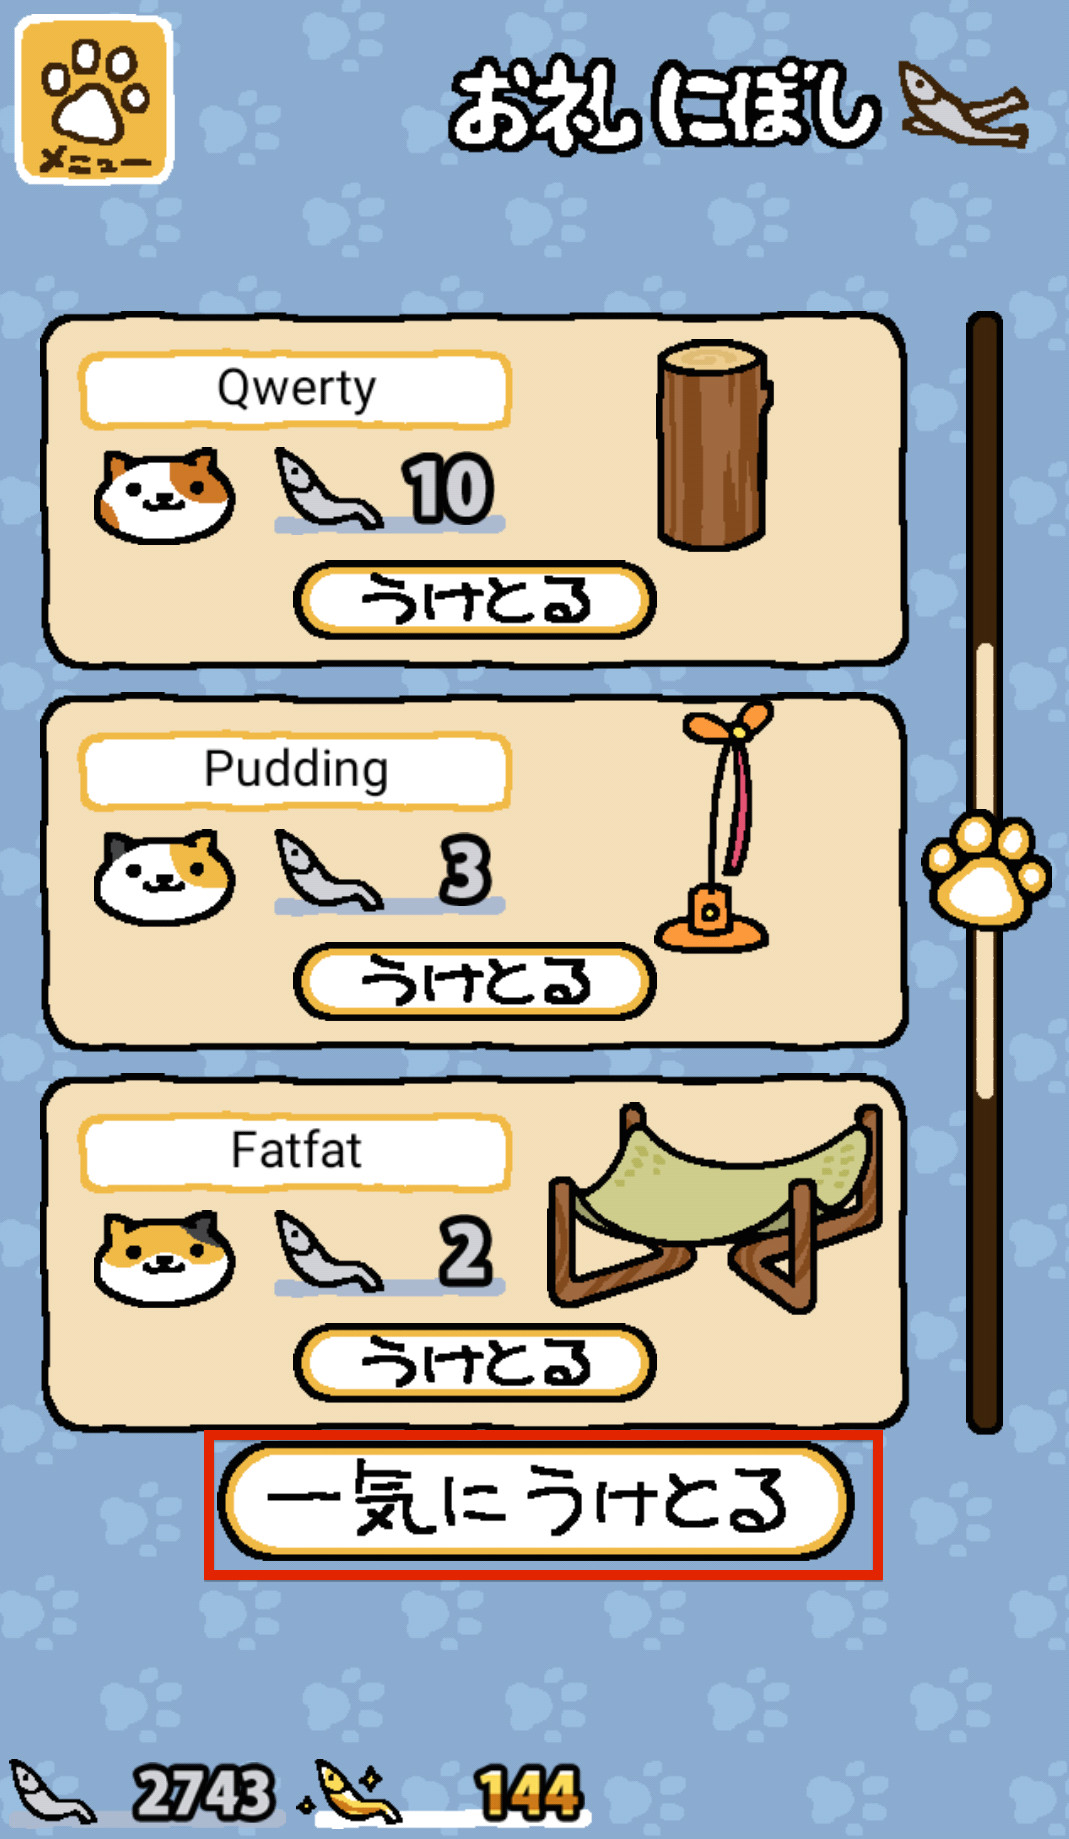 Here's the fish collection screen in Neko Atsume.